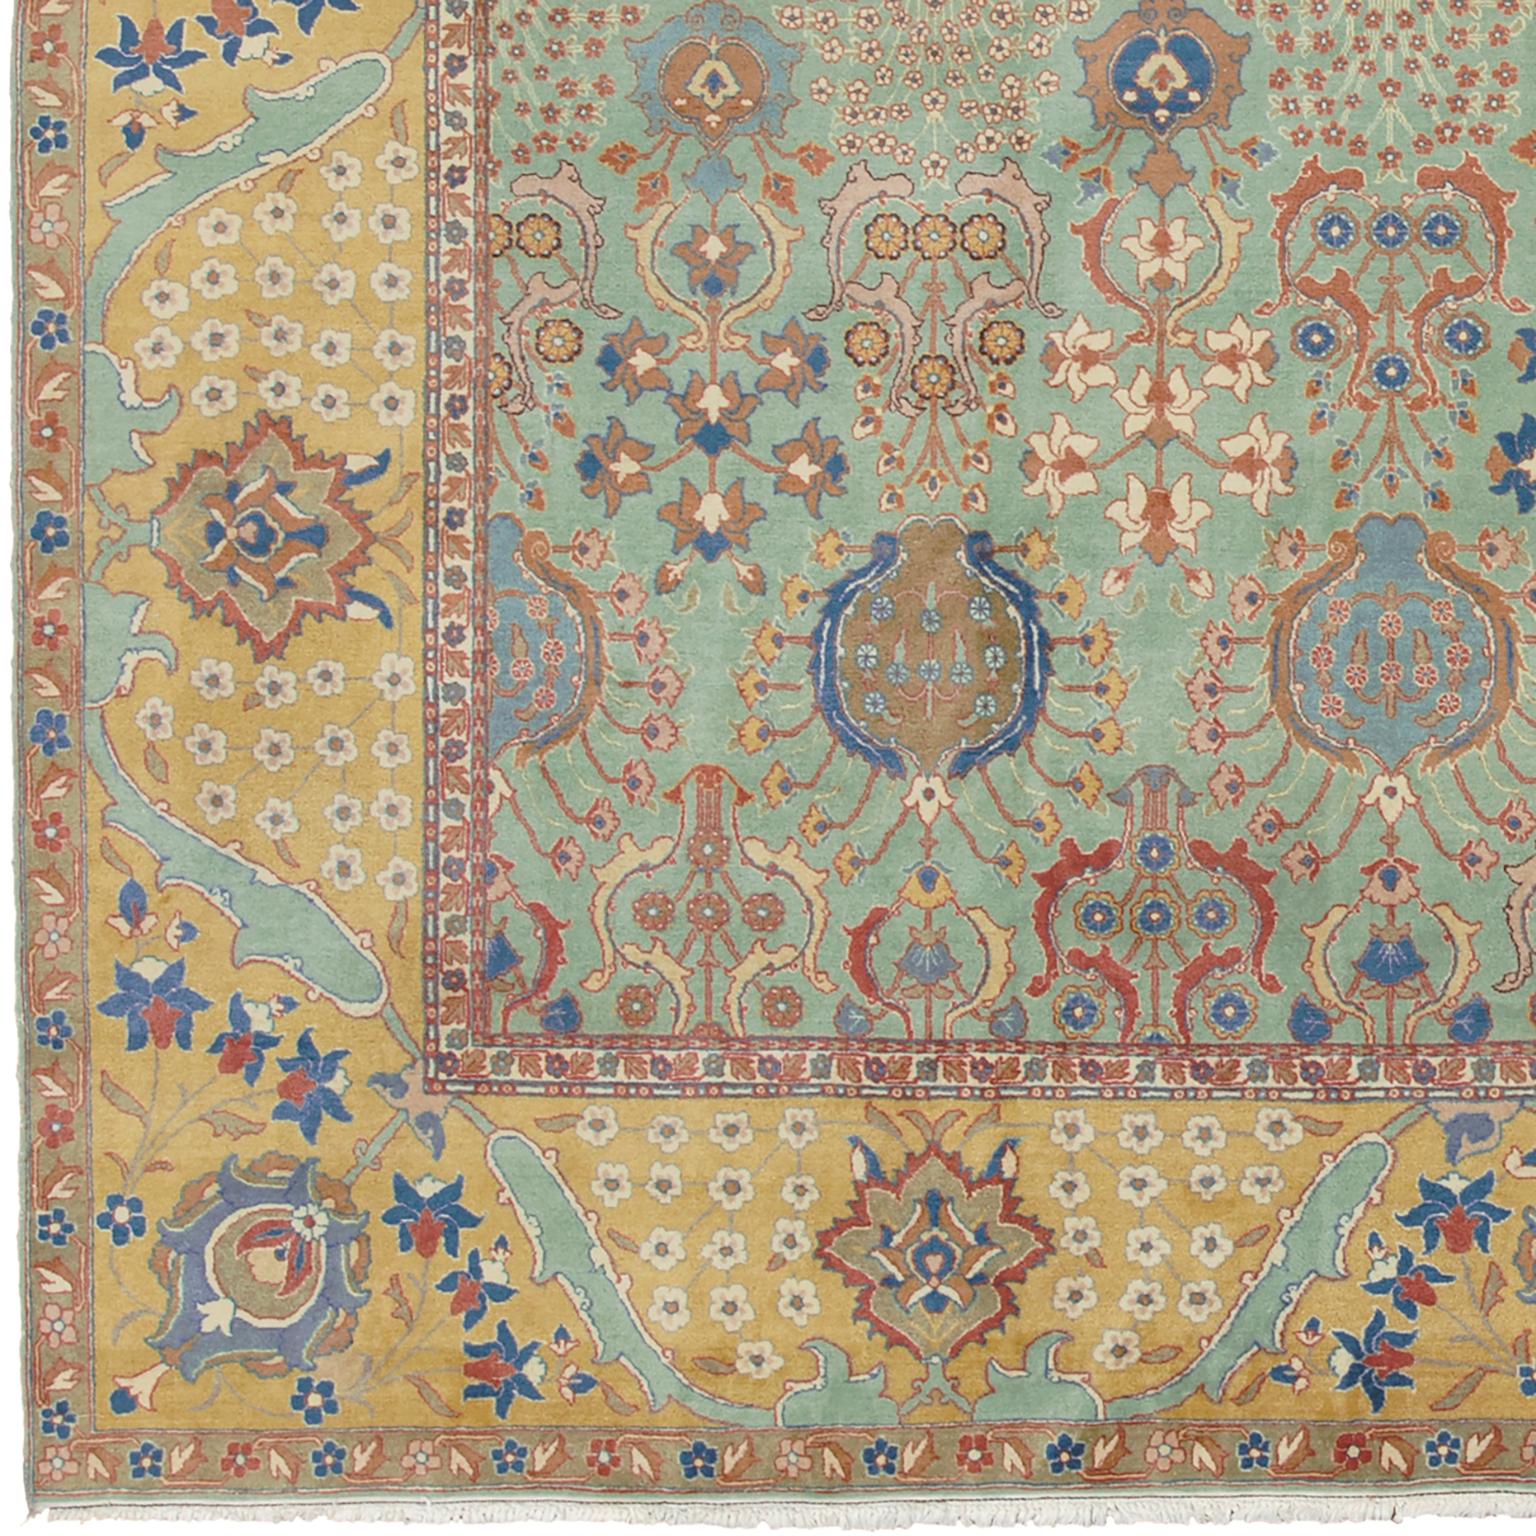 Antique Persian Tabriz rug
North-West Persia, circa 1920
Handwoven
The overall design of flowering palmettes and naturalistic floral sprays on the present carpet clearly derives from a 17th century Isfahan carpet that is in the Museum fur